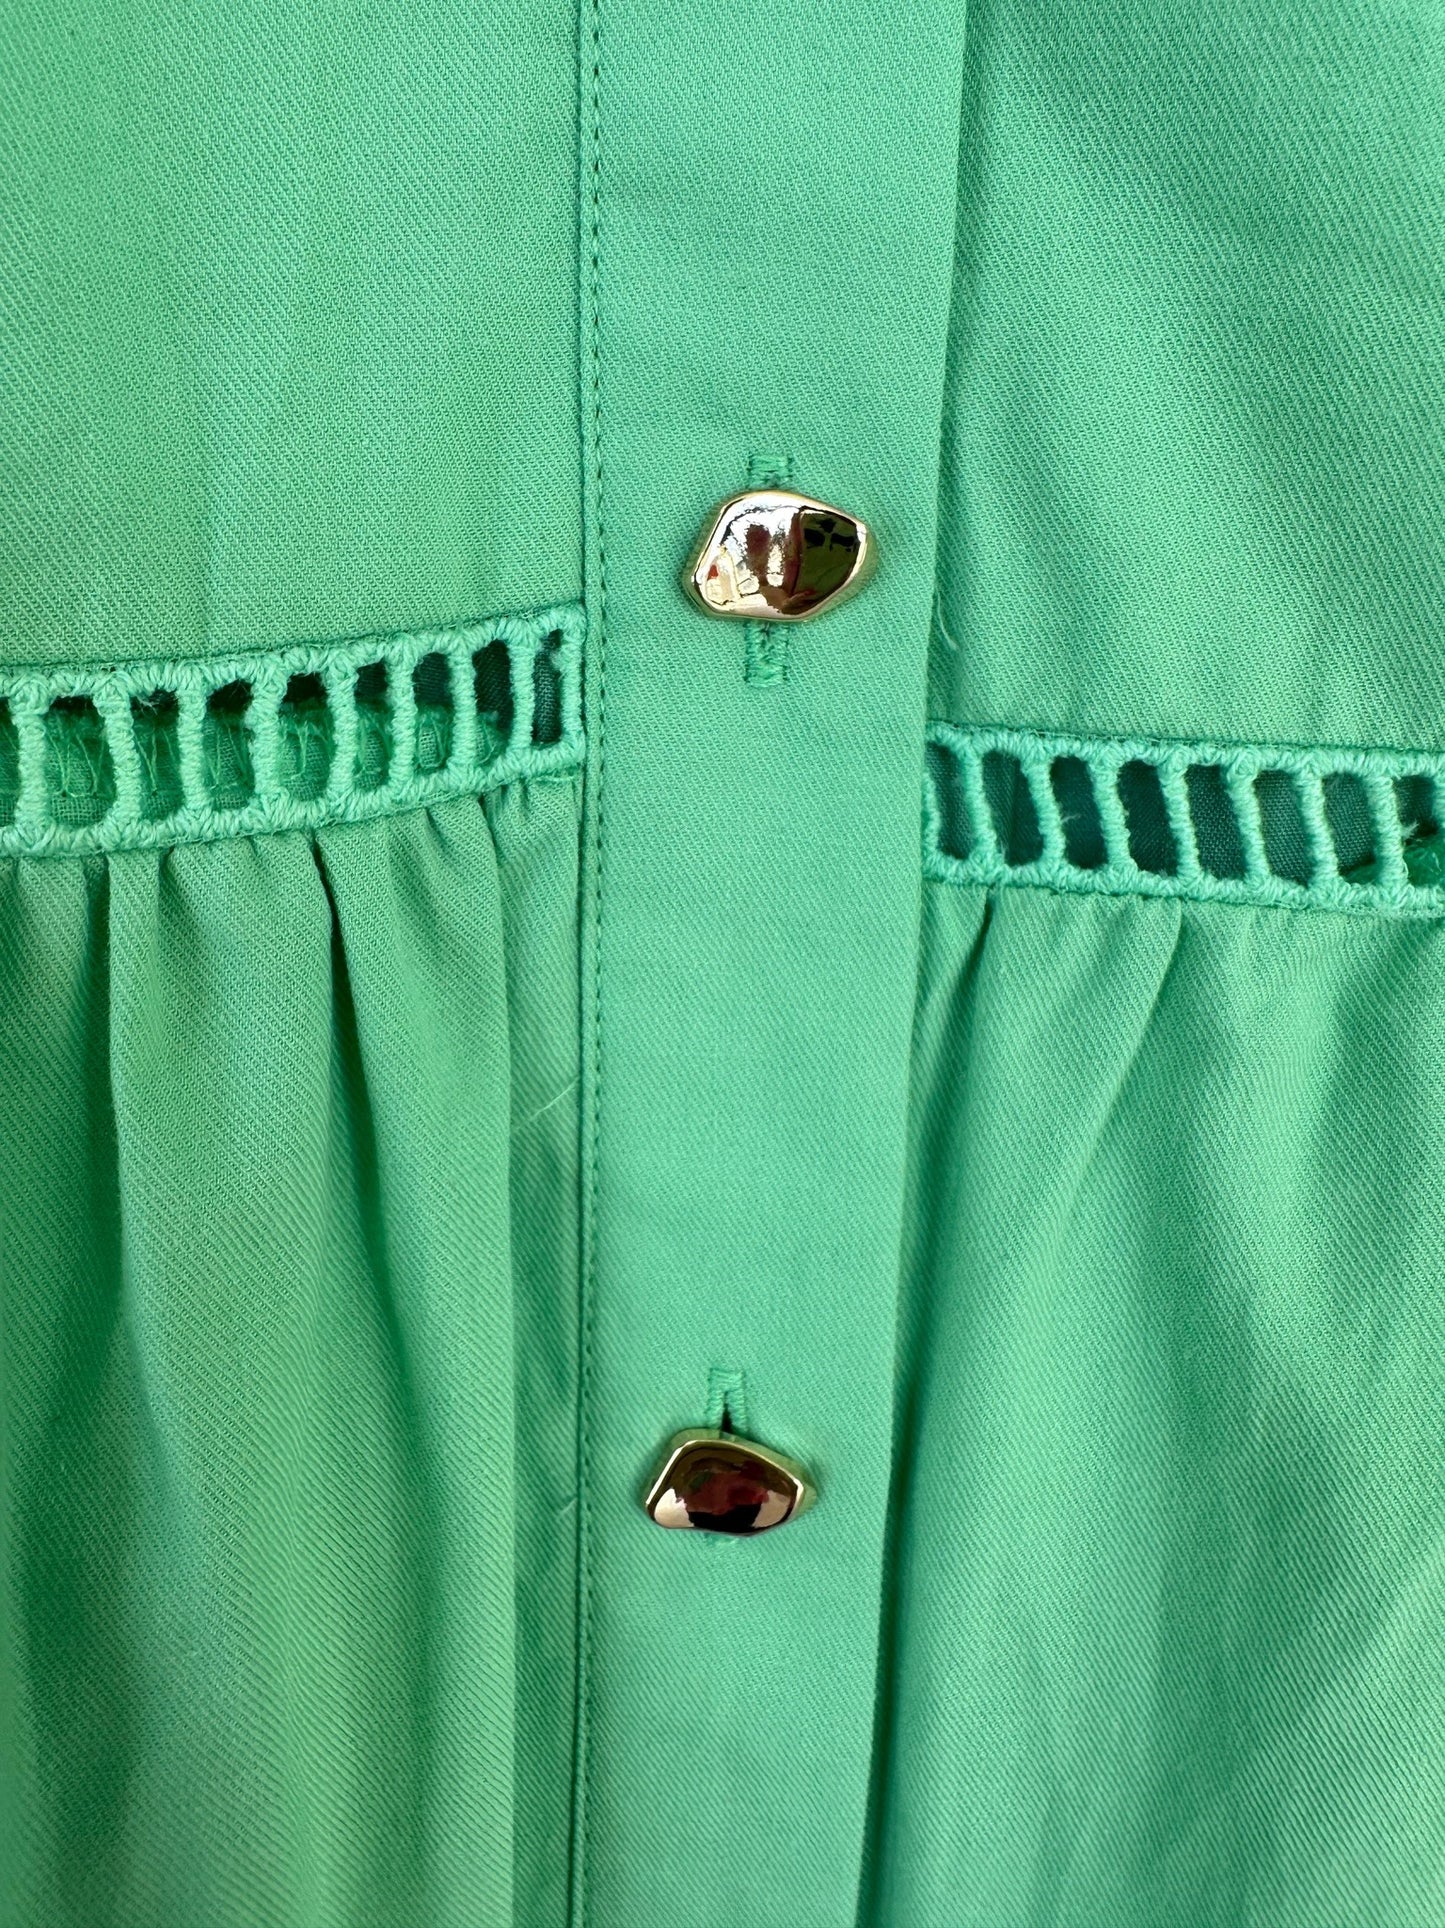 Spring Green Dress with Gold Buttons